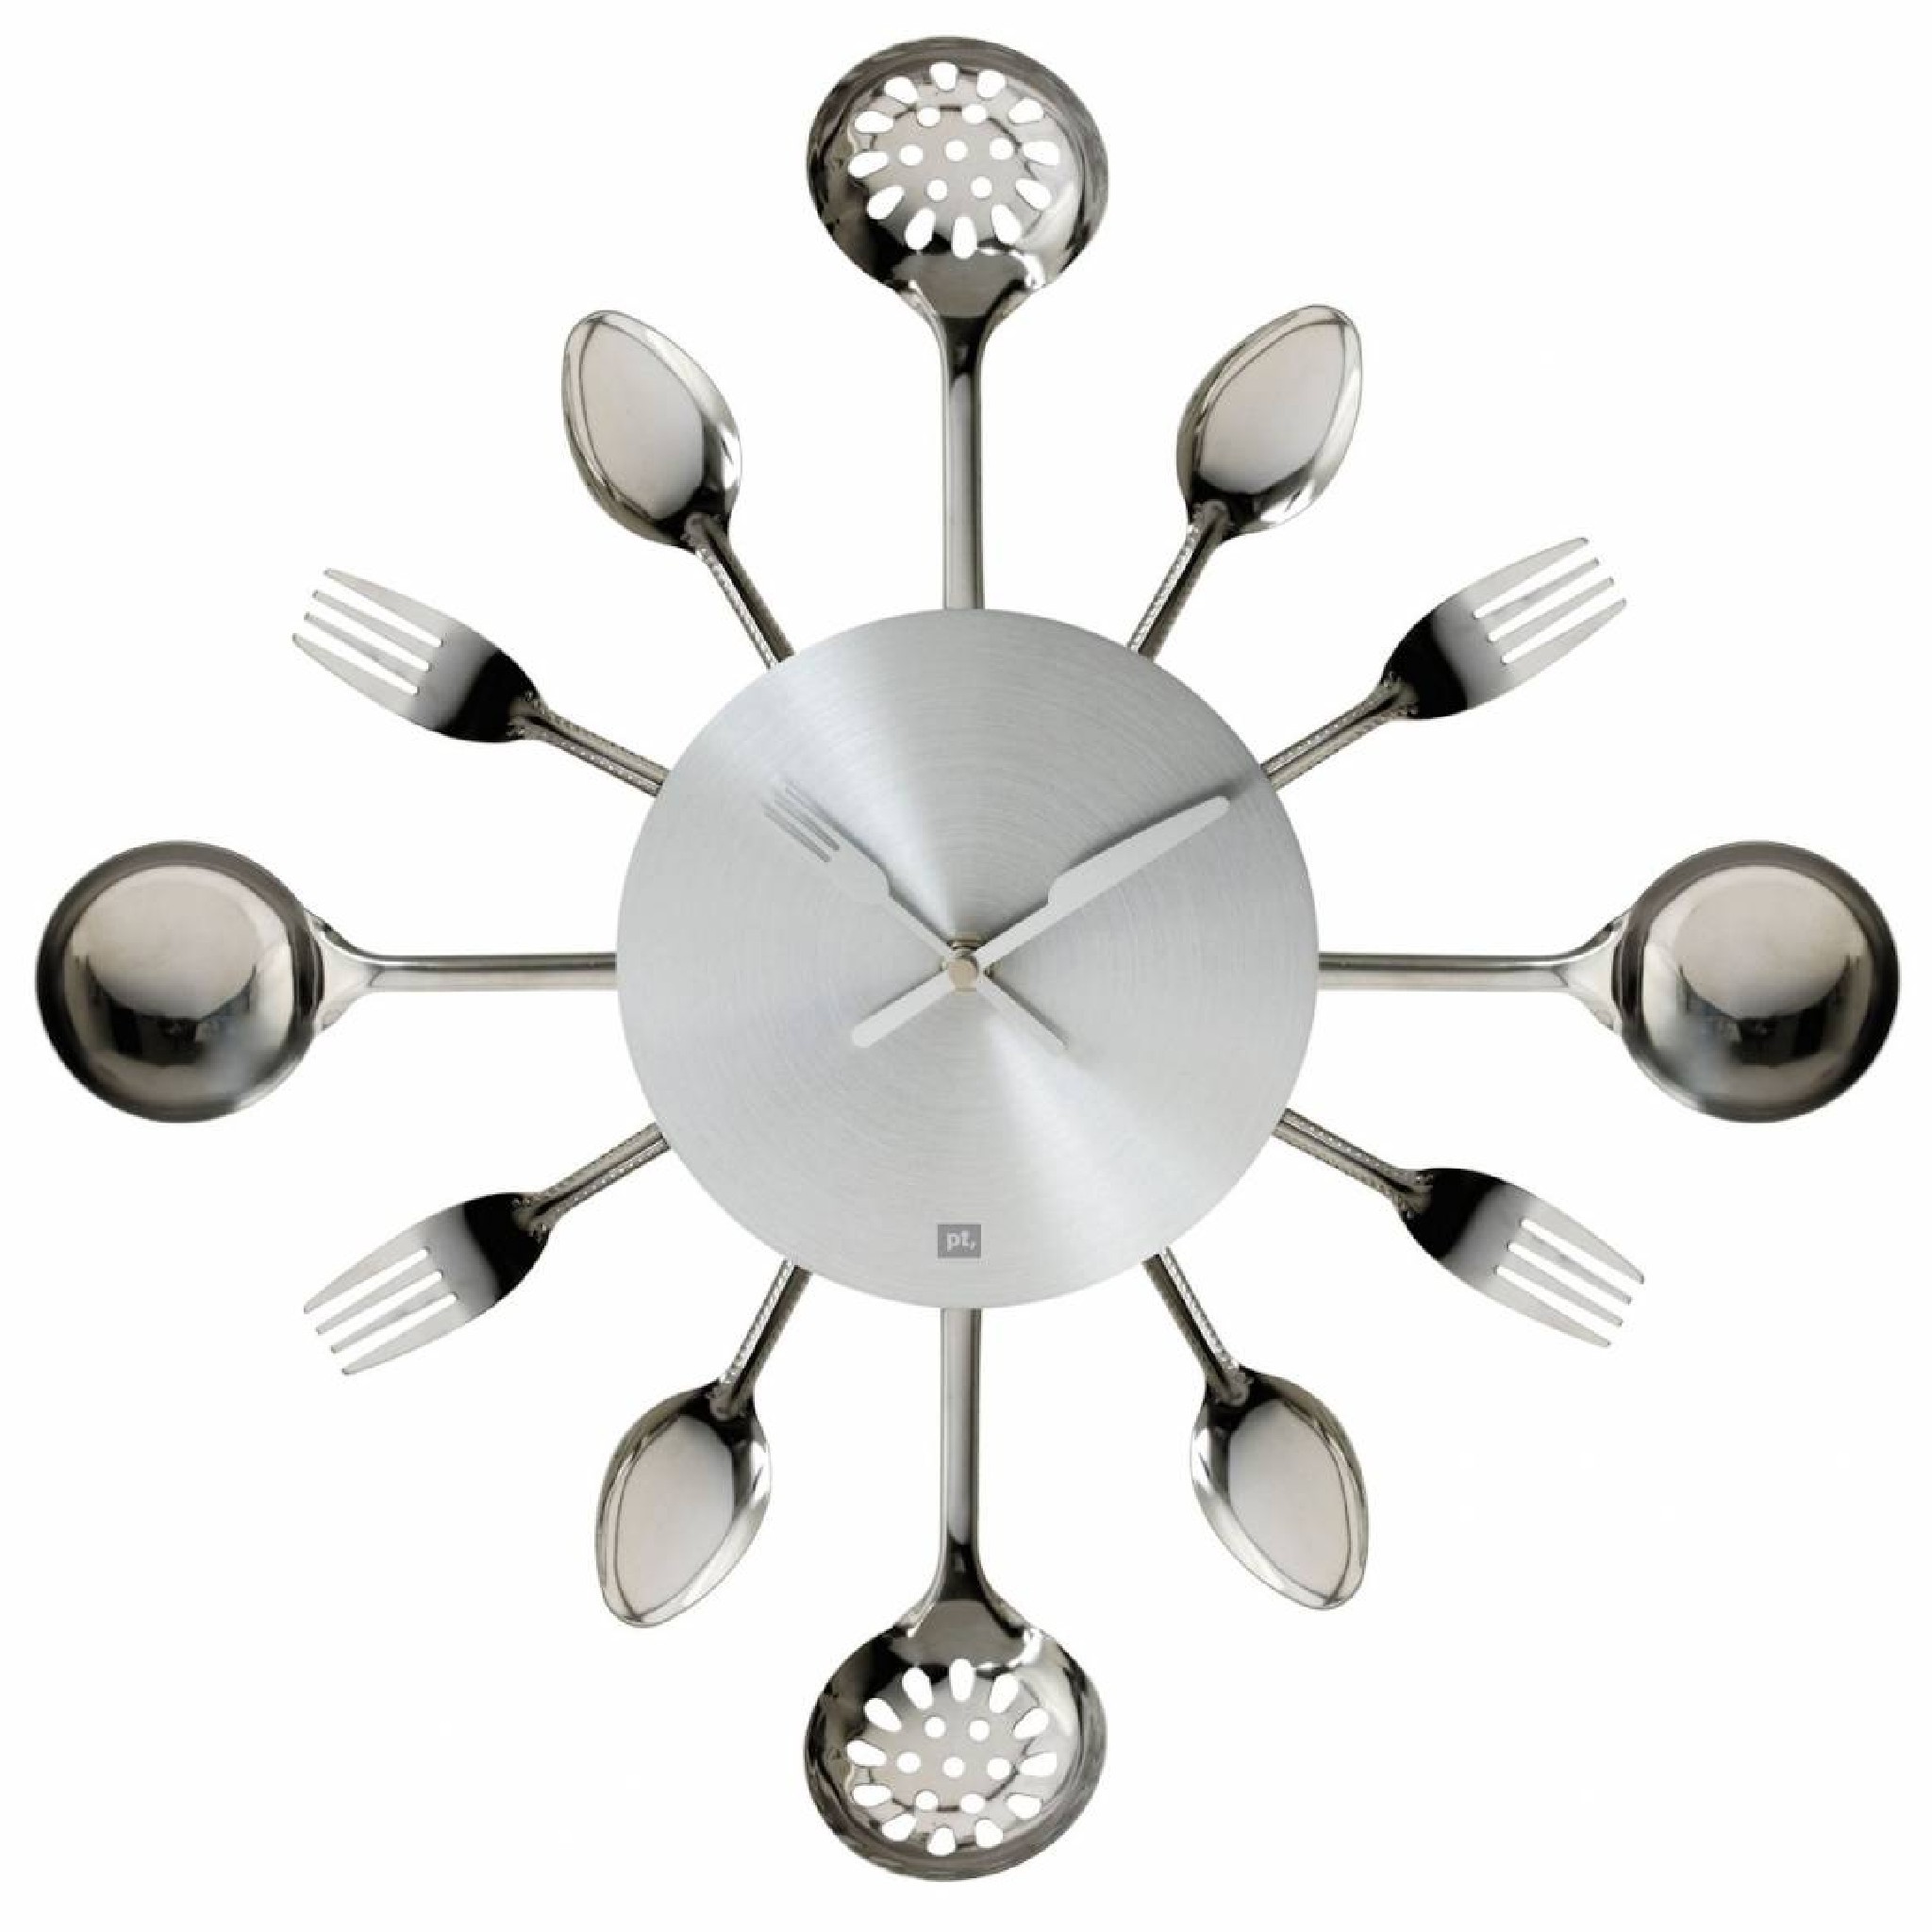 Totally funky wall clock kitchen utensils